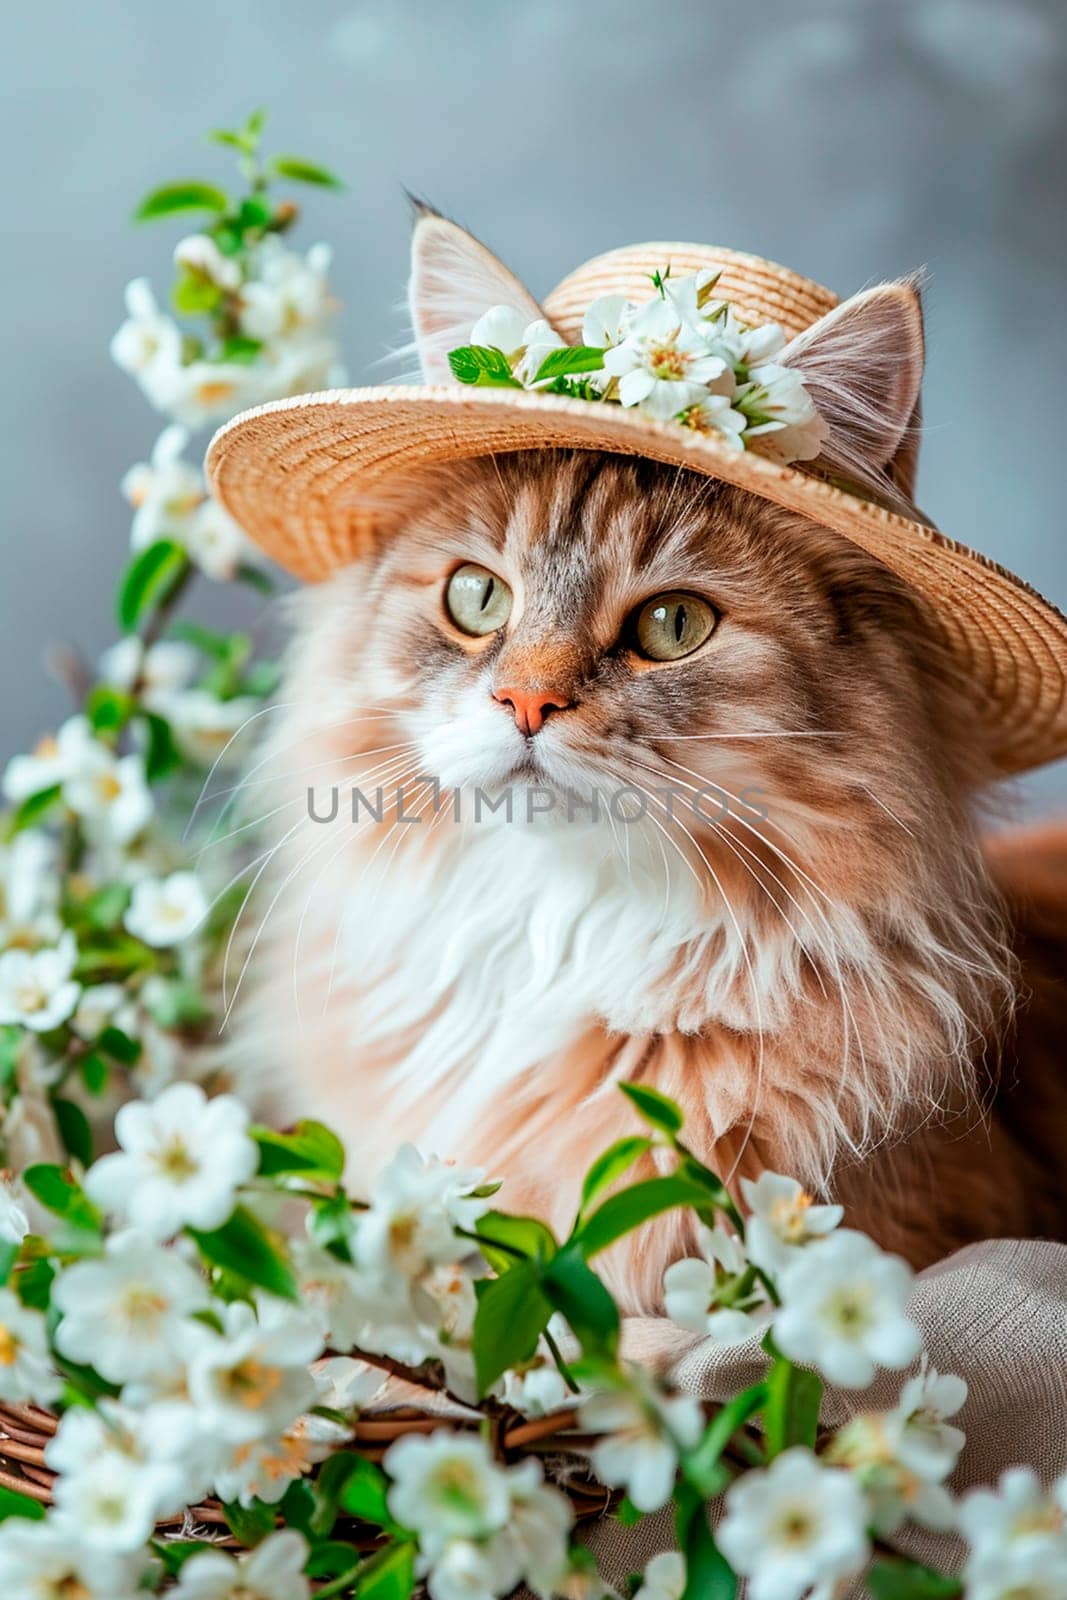 portrait of a cat in a hat in flowers. Selective focus. animal.